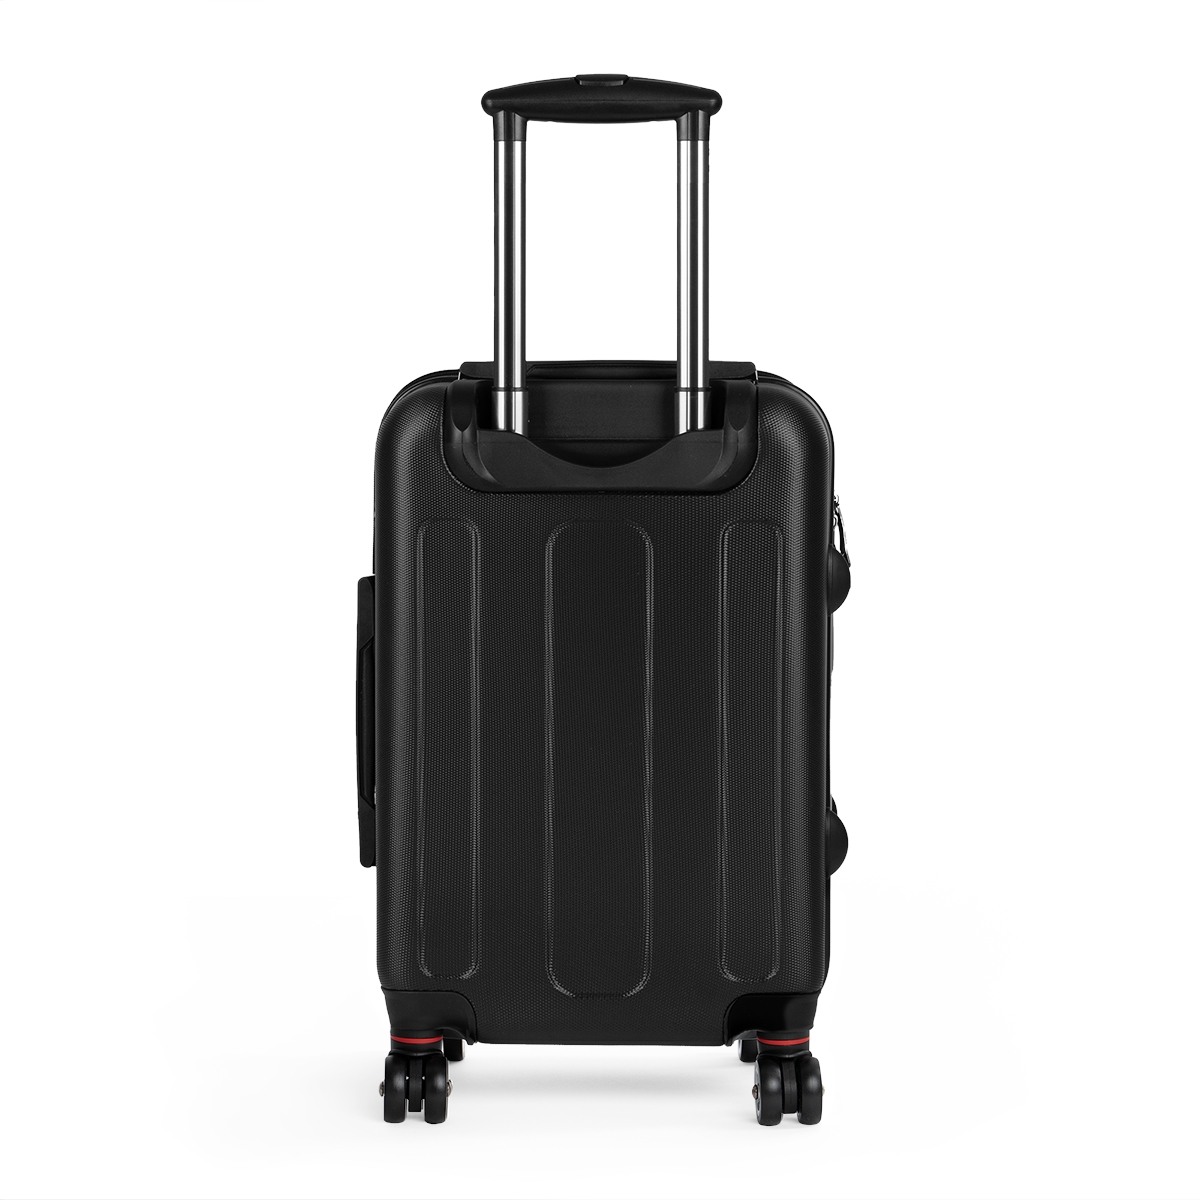 Exclusive IV Brand Luggage product thumbnail image